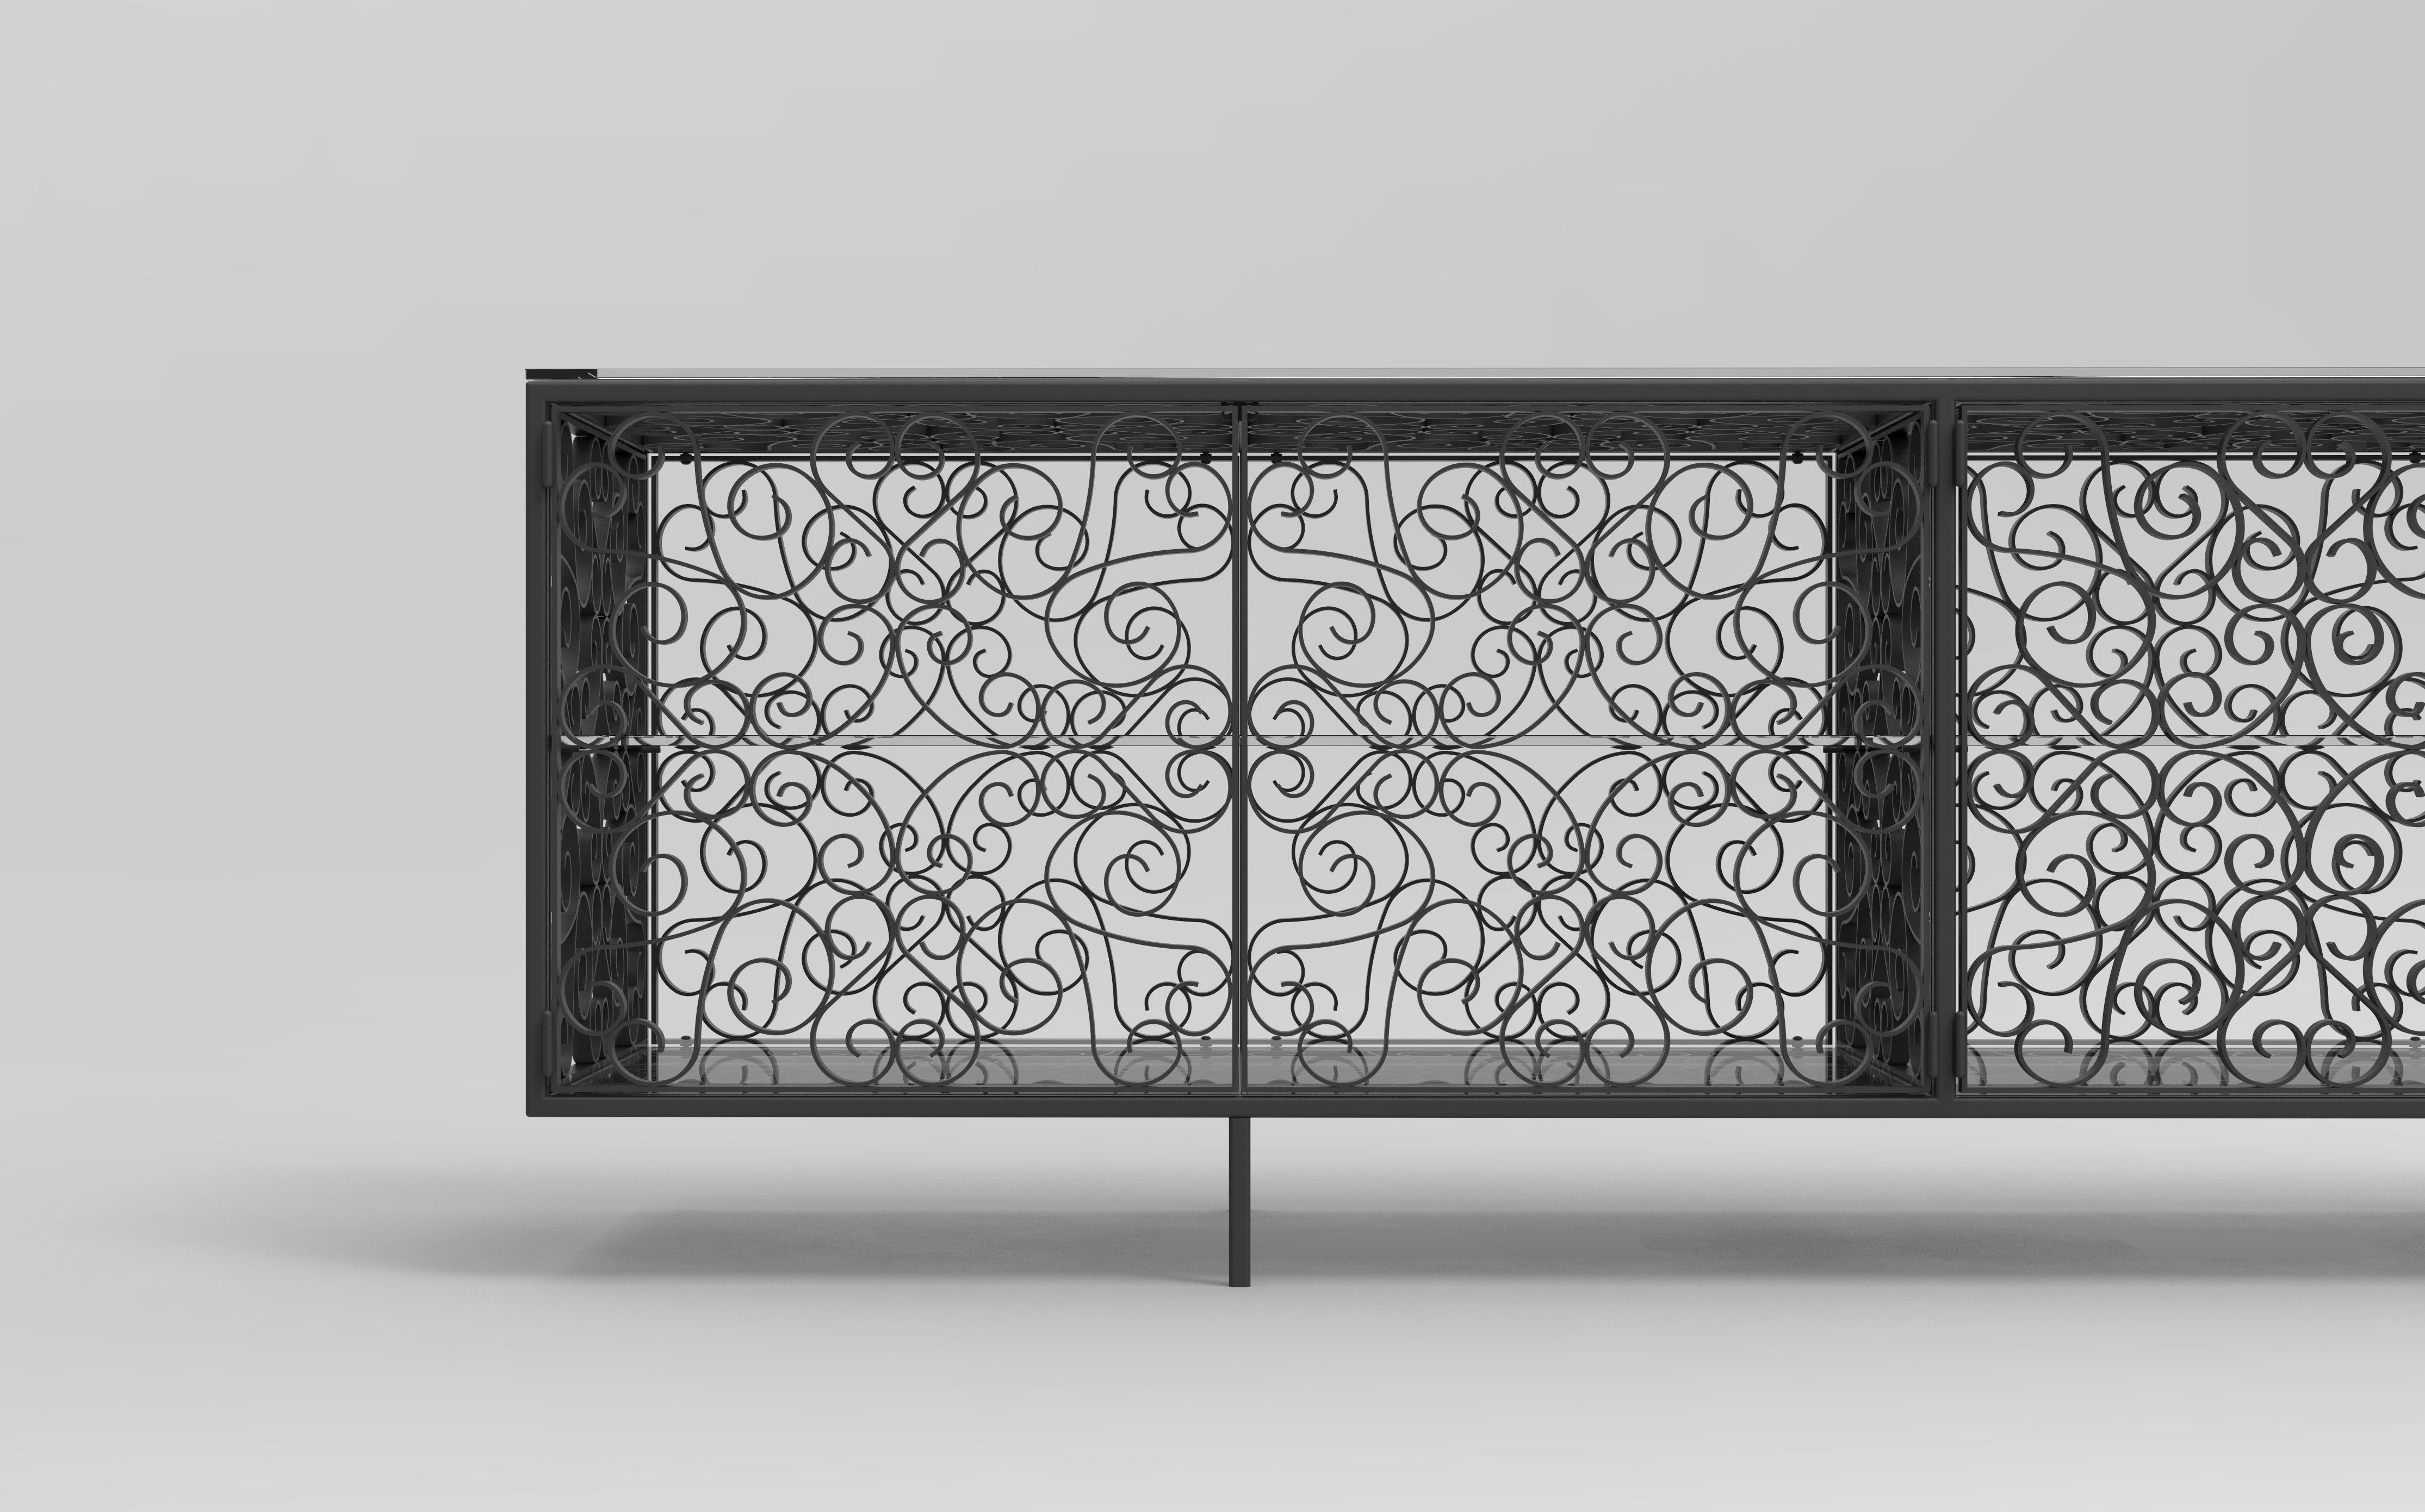 Dalia Cabinet designed by Joel Escalona for BD Barcelona. The design follows a traditional iron forging style which makes the structure looks protective and decorative. Joel Escalona is a Mexican designer so that this structure follows the Mexican